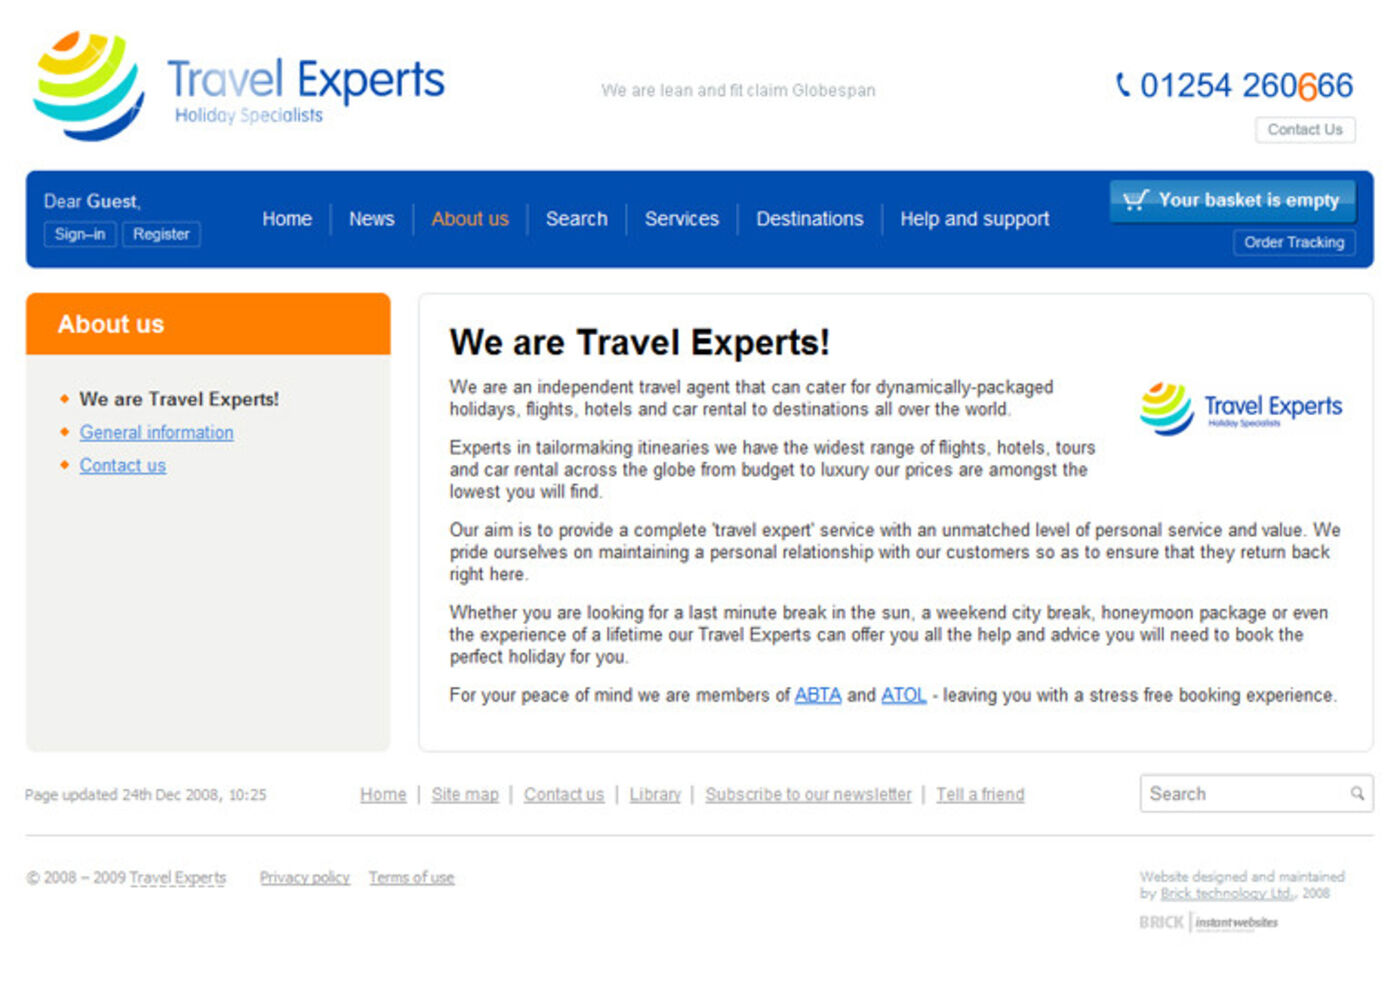 Travel Experts Regular page